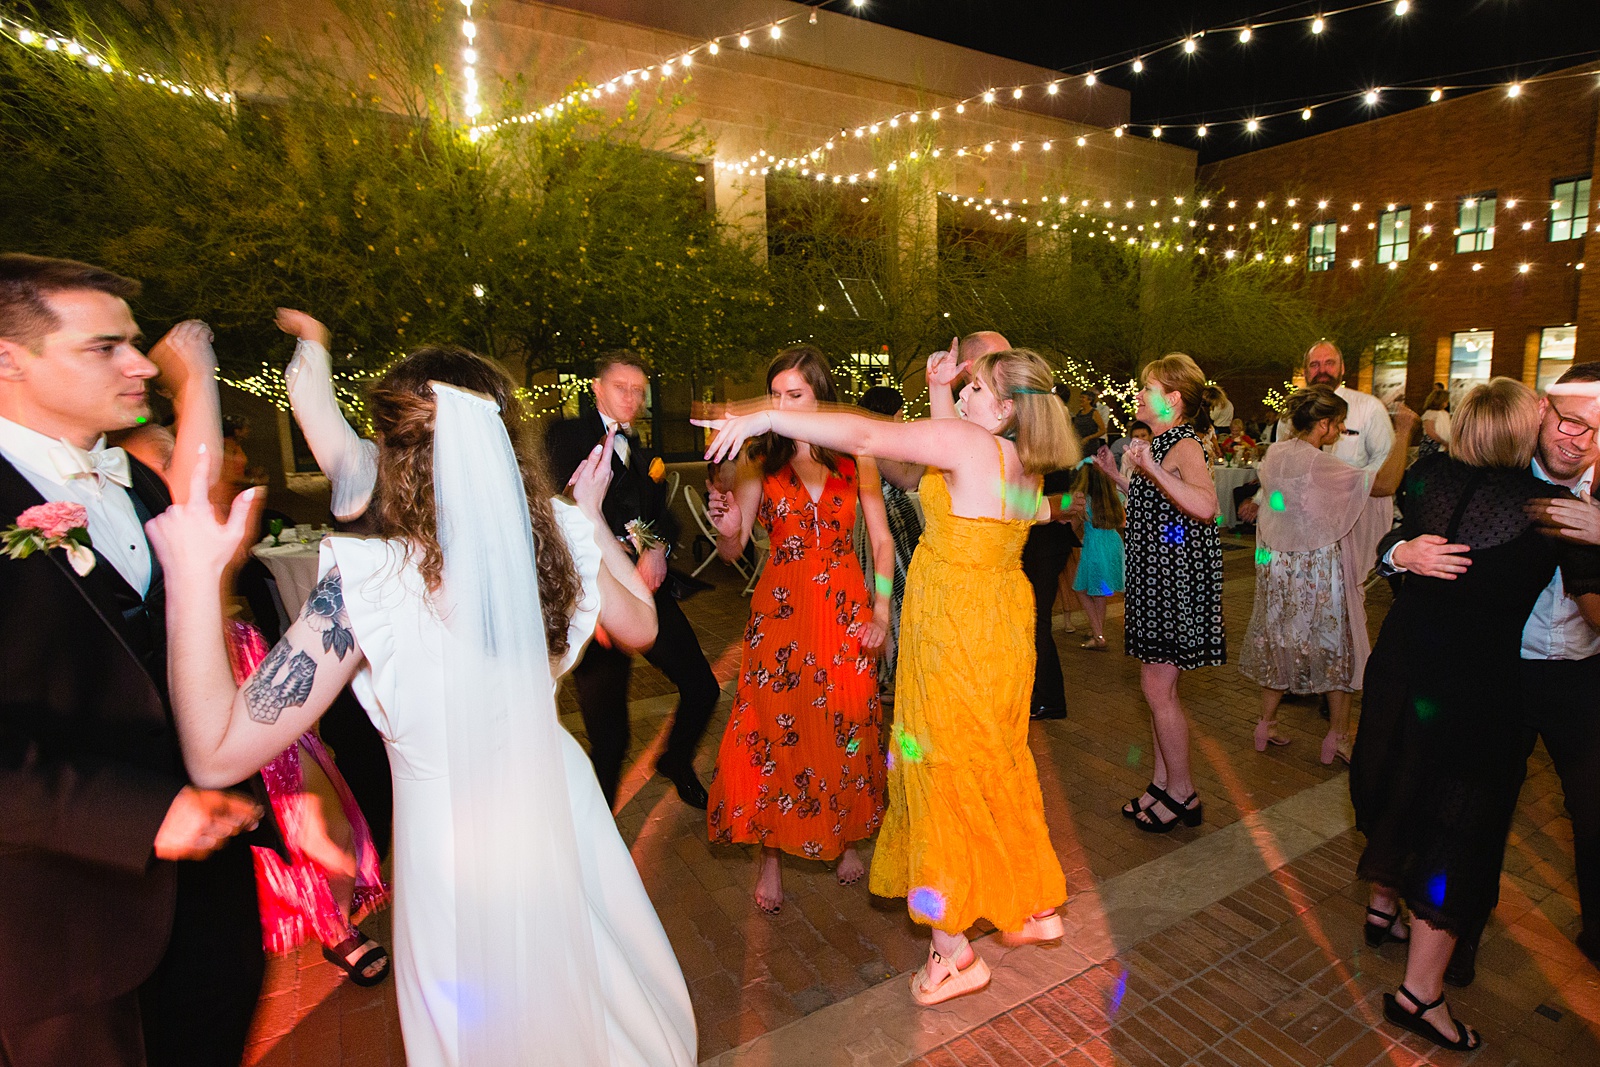 Guests dancing together at Arizona Historical Society wedding reception by Tempe wedding photographer PMA Photography